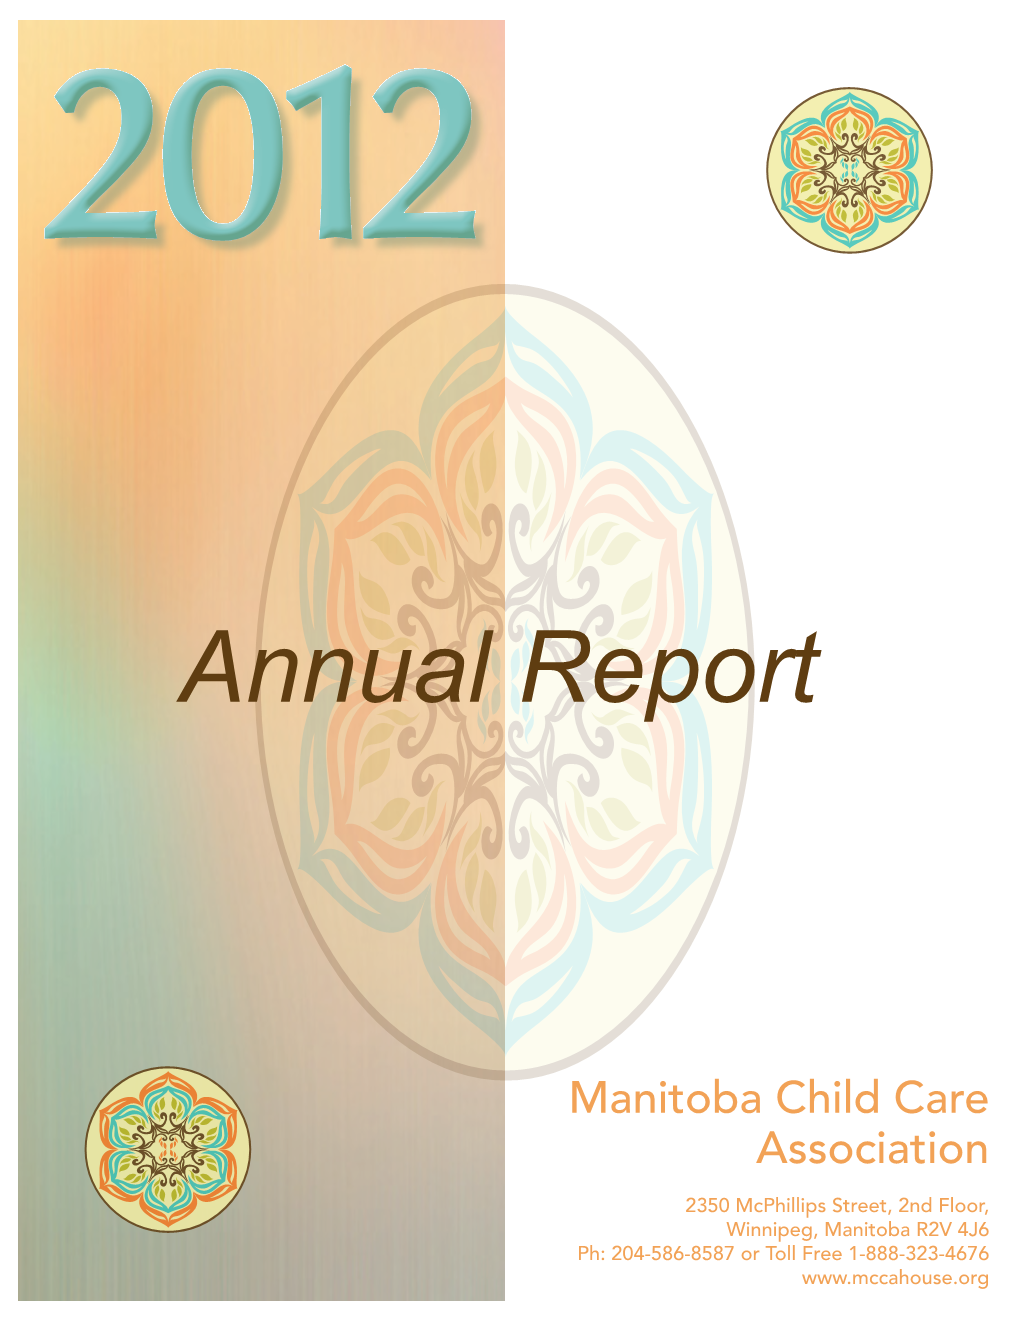 Download a Copy of Our 2012 Annual Report